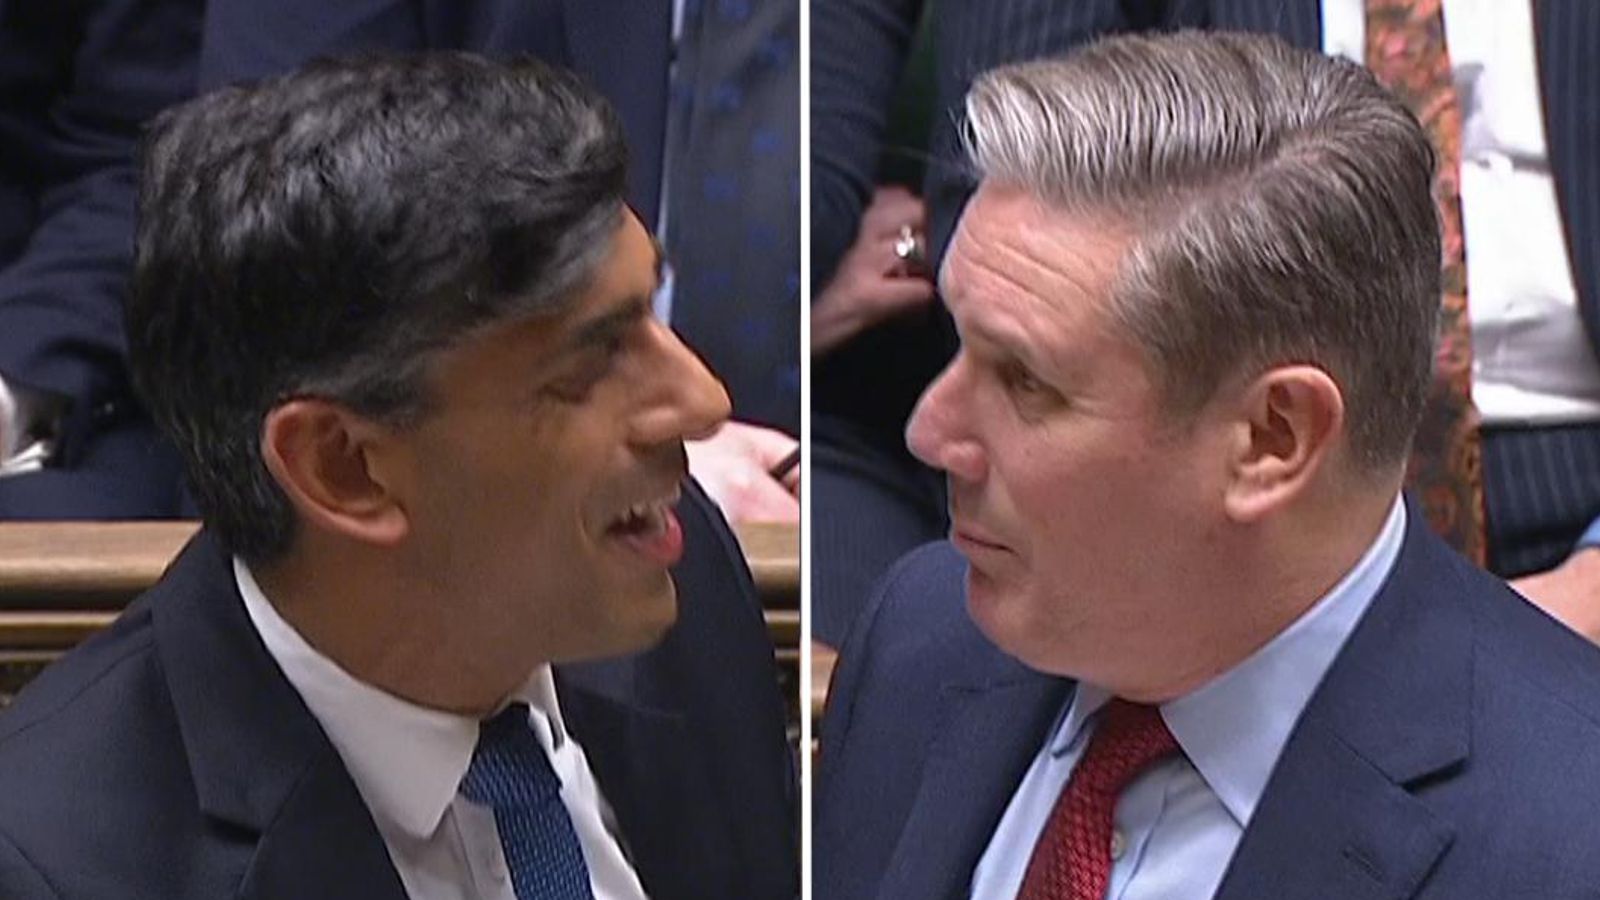 The general election campaign has begun - as Rishi Sunak and Sir Keir Starmer focus on the economy